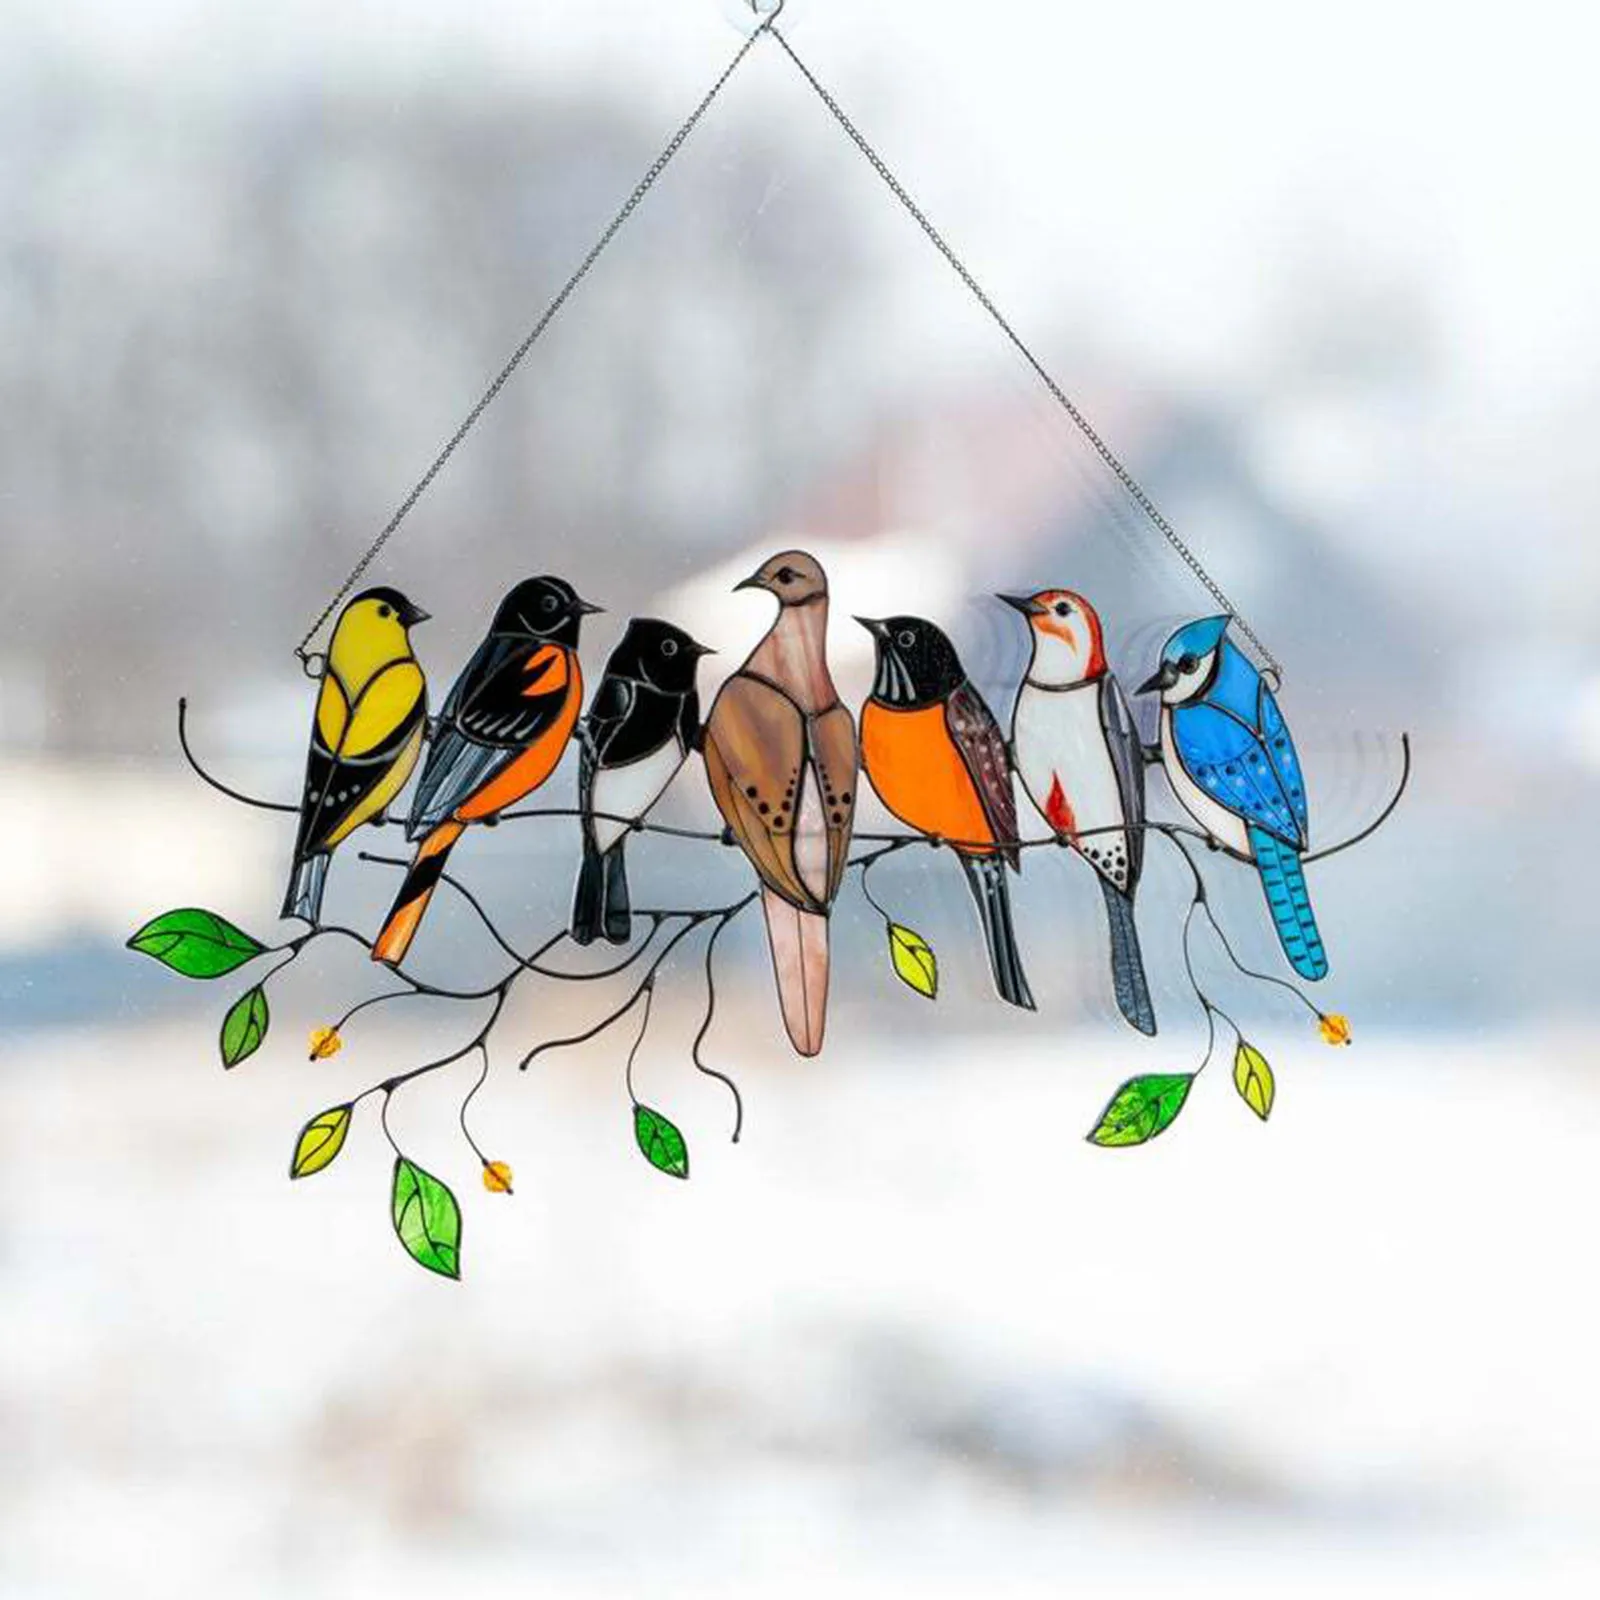 Bathroom FTALGS Multicolor Birds on a Wire High Stained Glass Suncatcher Window Panel,Hanging for Home Decor,Living Room # 3 Hanging Vintage Wall Sconce Windows Doors Home Decoration and Gifts